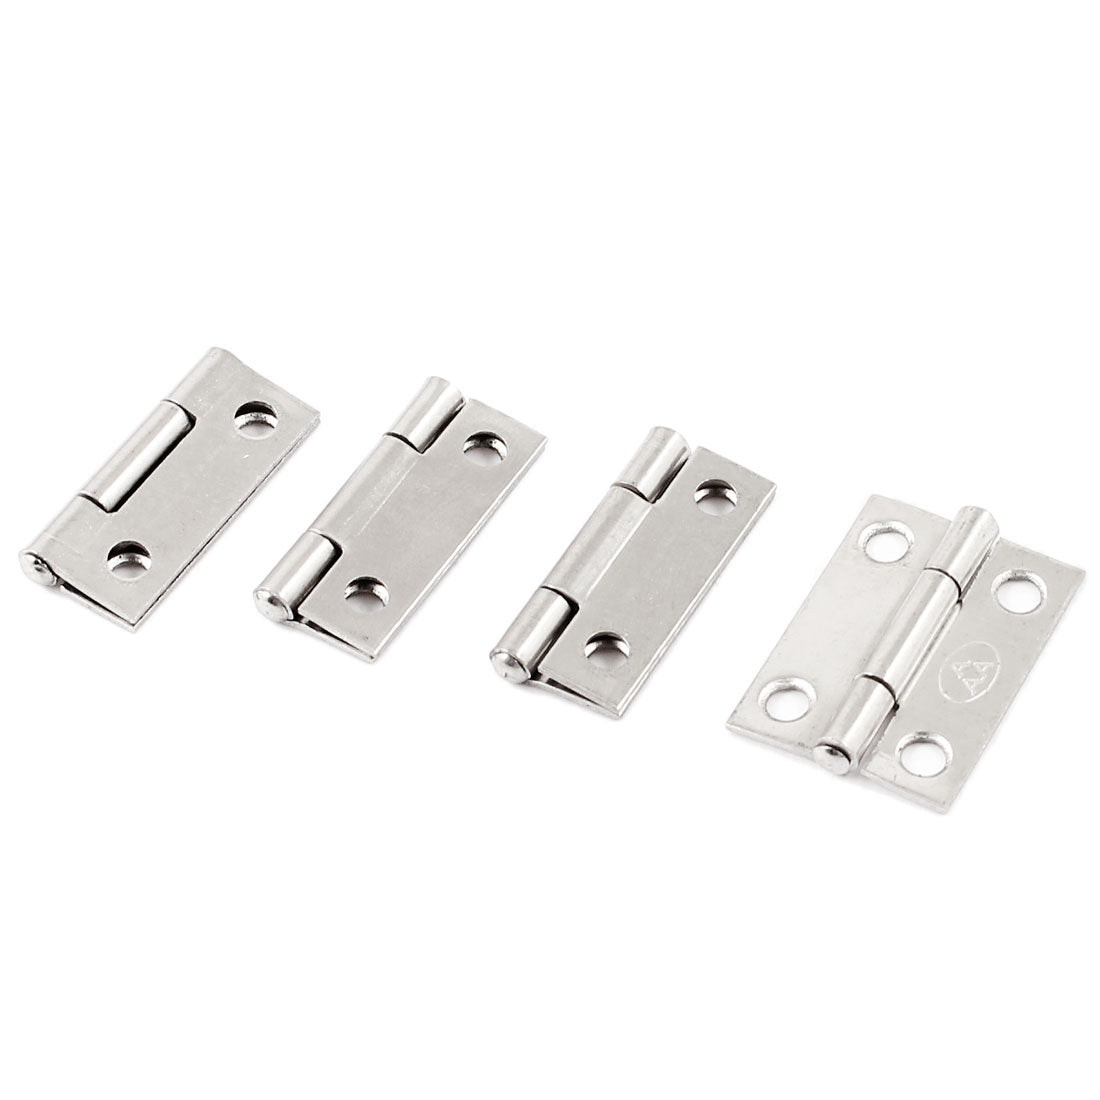 uxcell Uxcell 4 Pcs Silver Tone Stainless Steel 25mm Long Door Hinge for Cupboard Cabinet